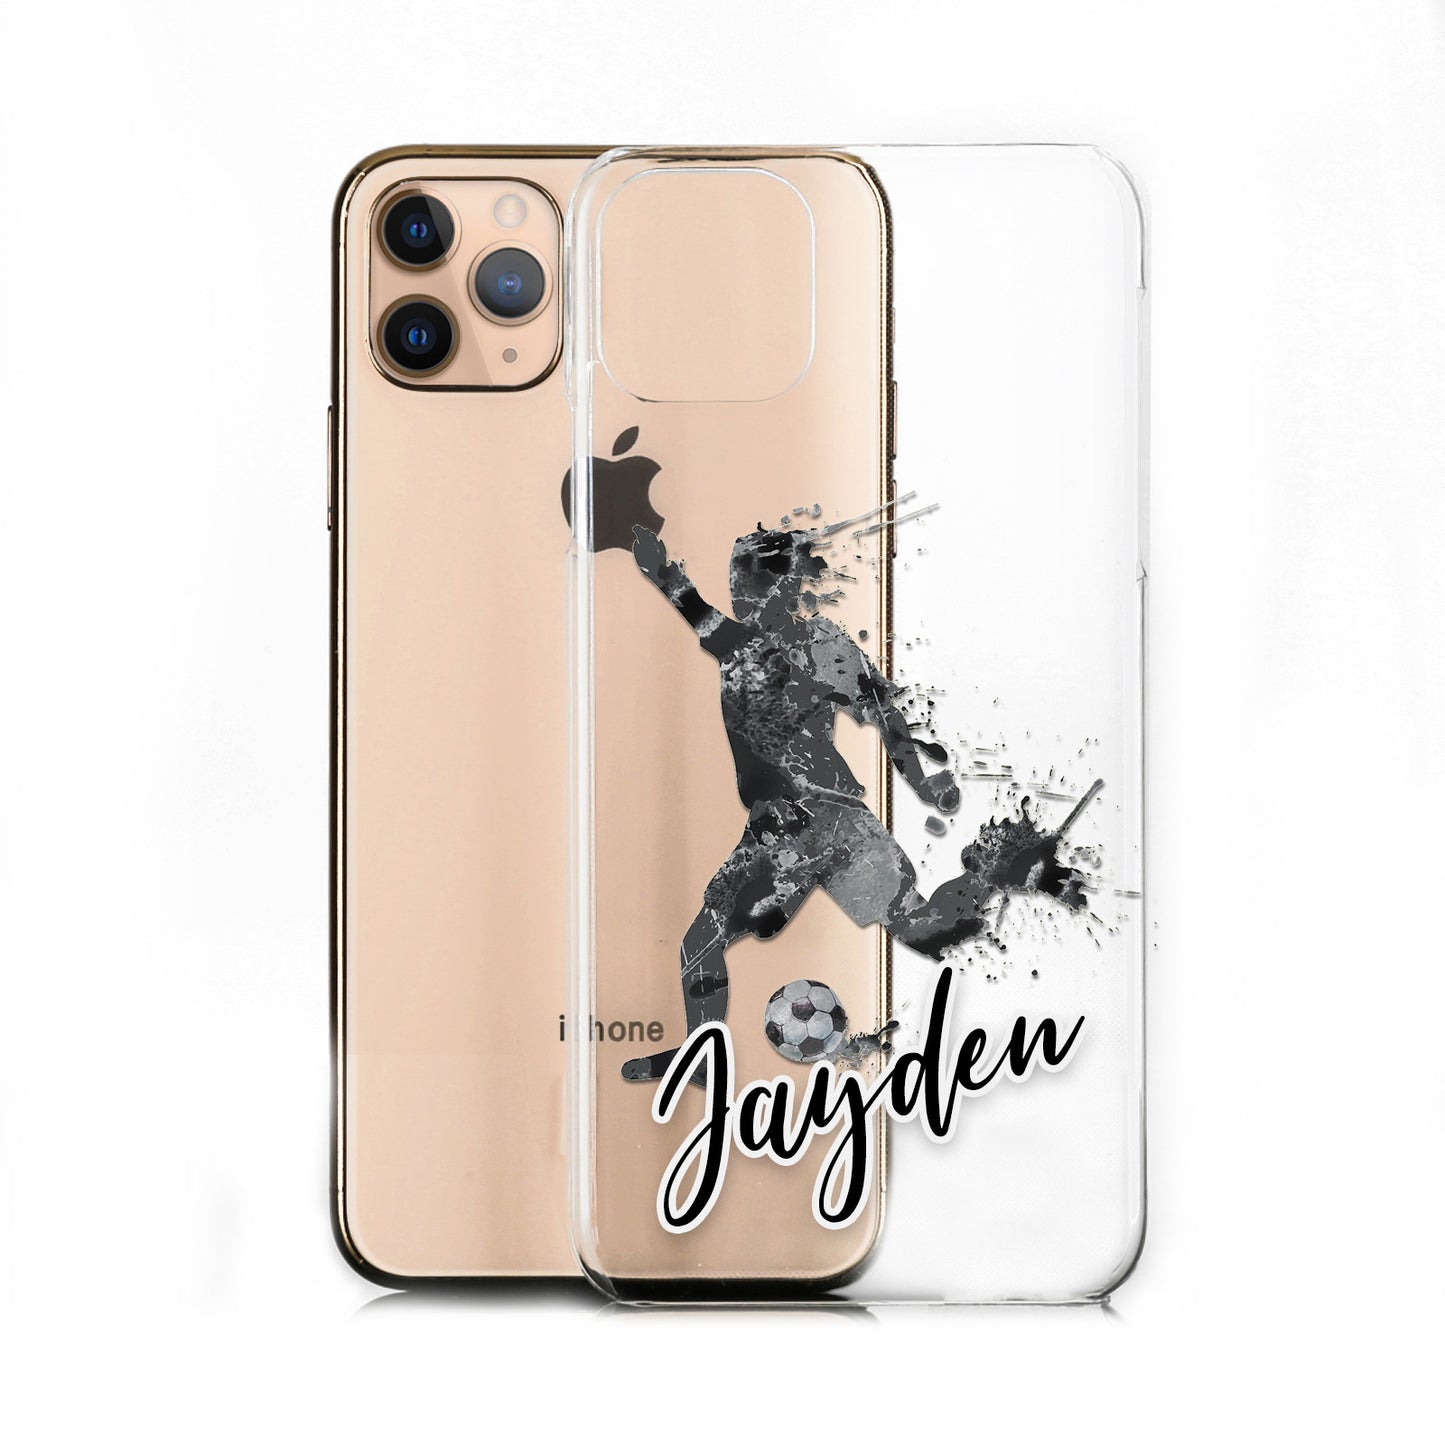 Personalised LG Phone Hard Case - Ash Grey Football Star with White Outlined Text